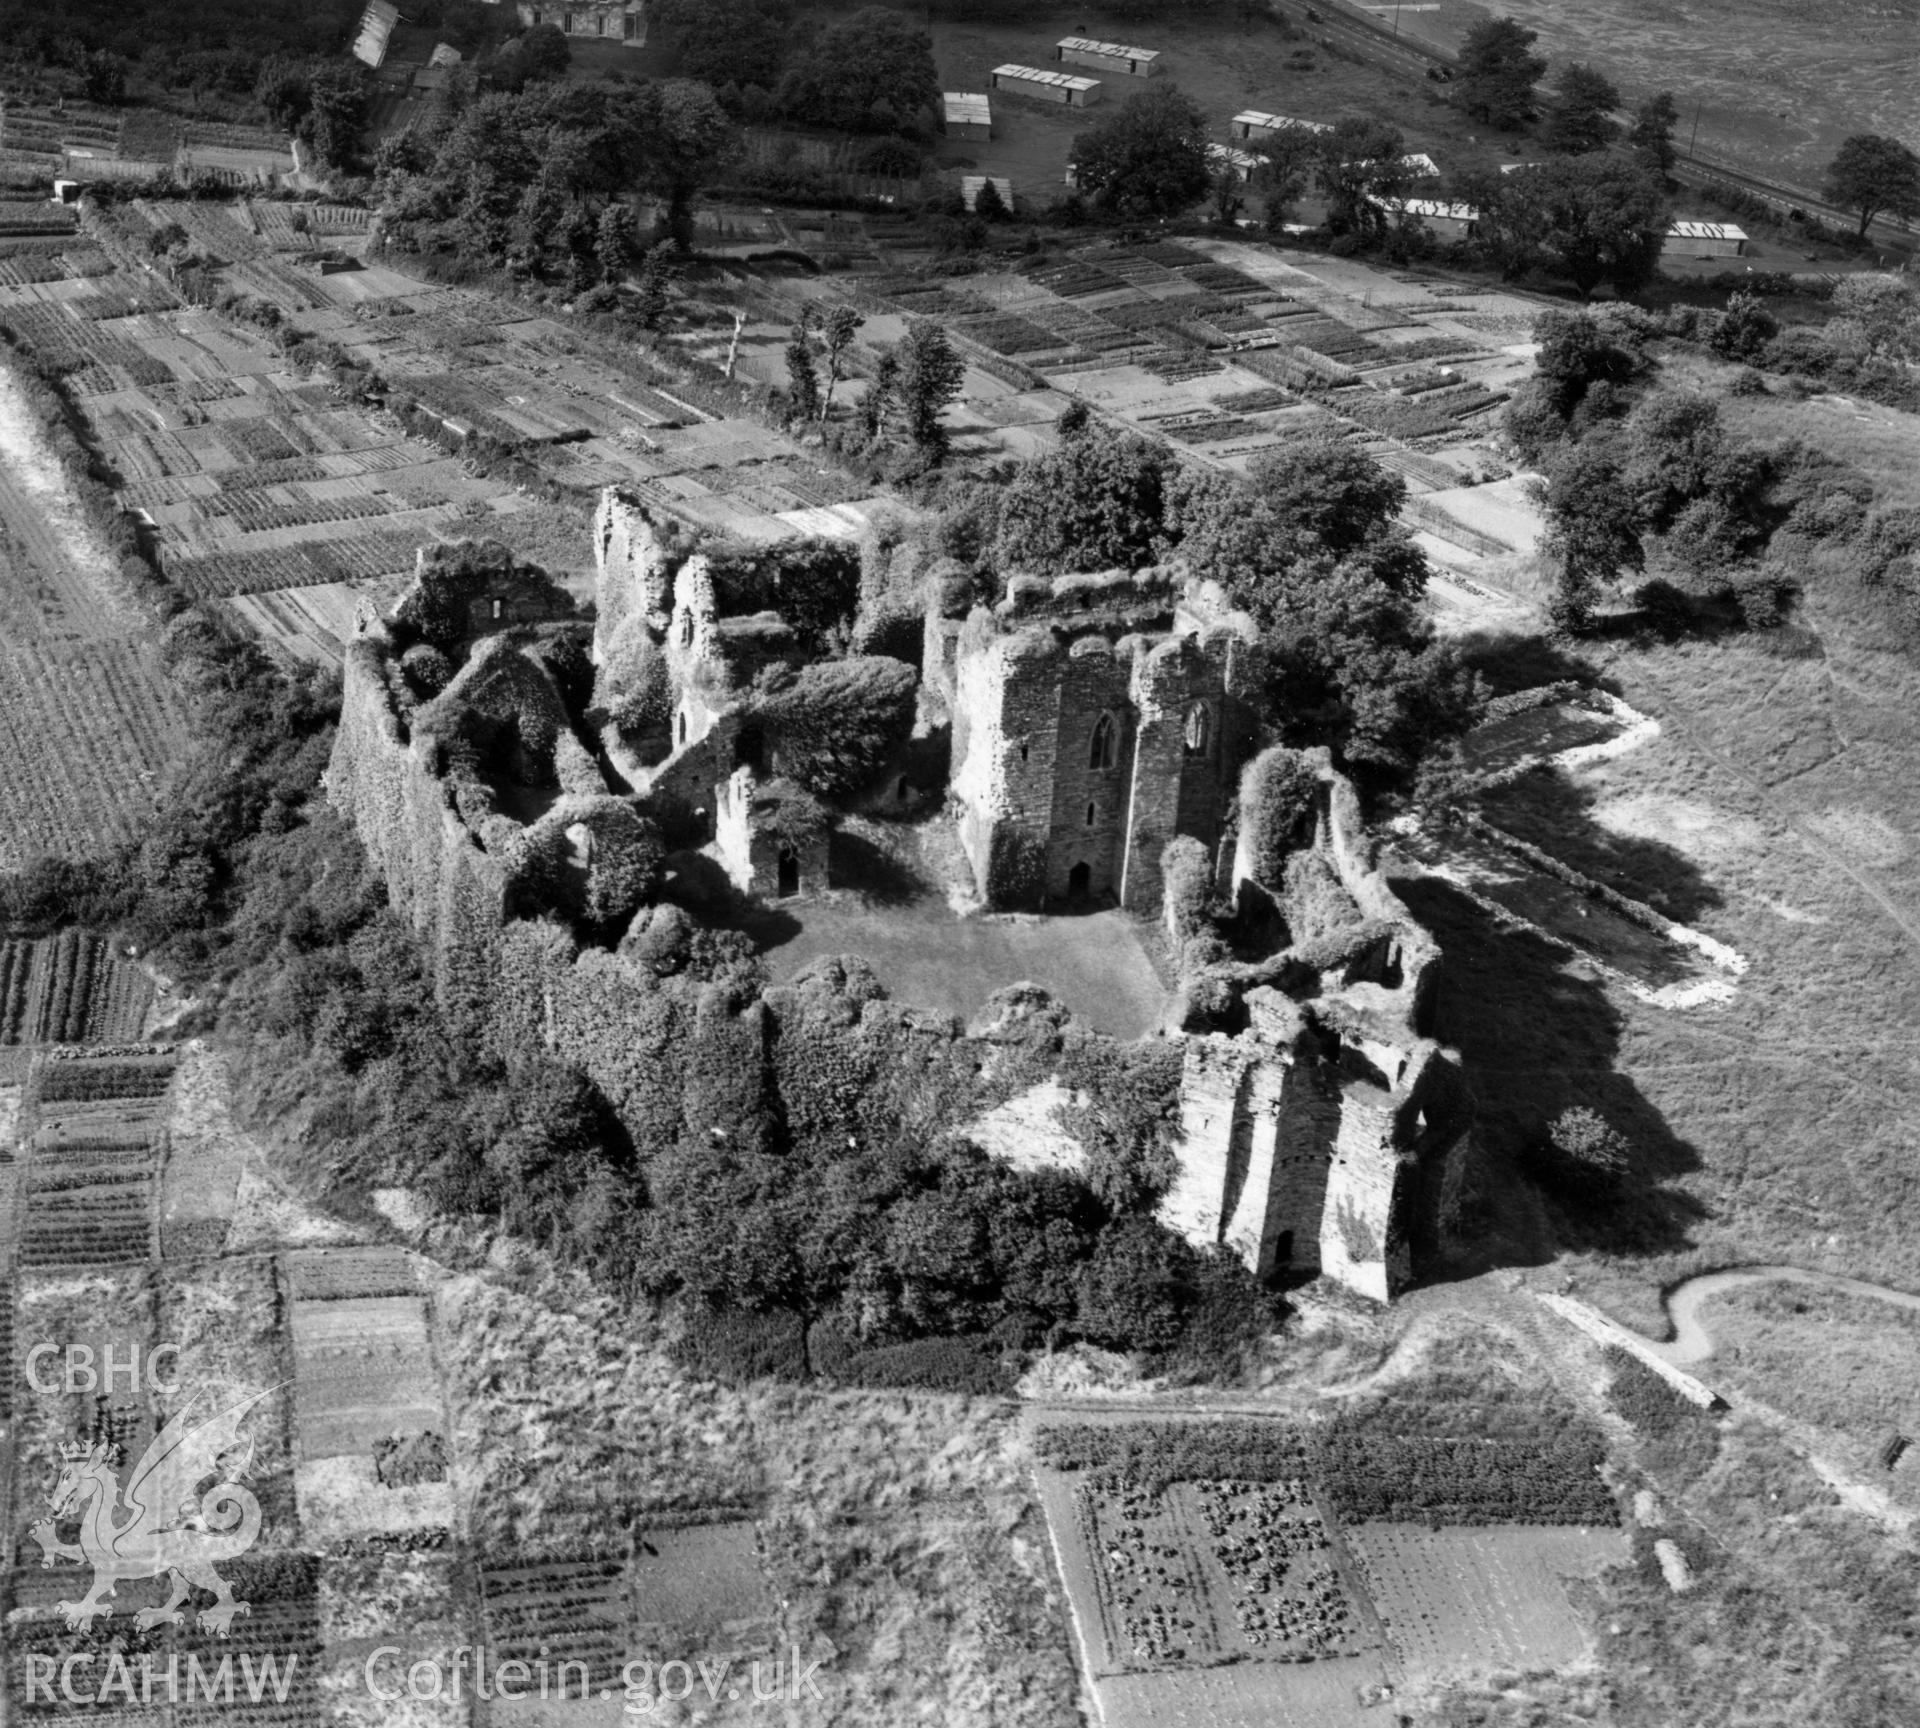 View of Oystermouth castle showing surrounding allotment gardens. Oblique aerial photograph, 5?" cut roll film.